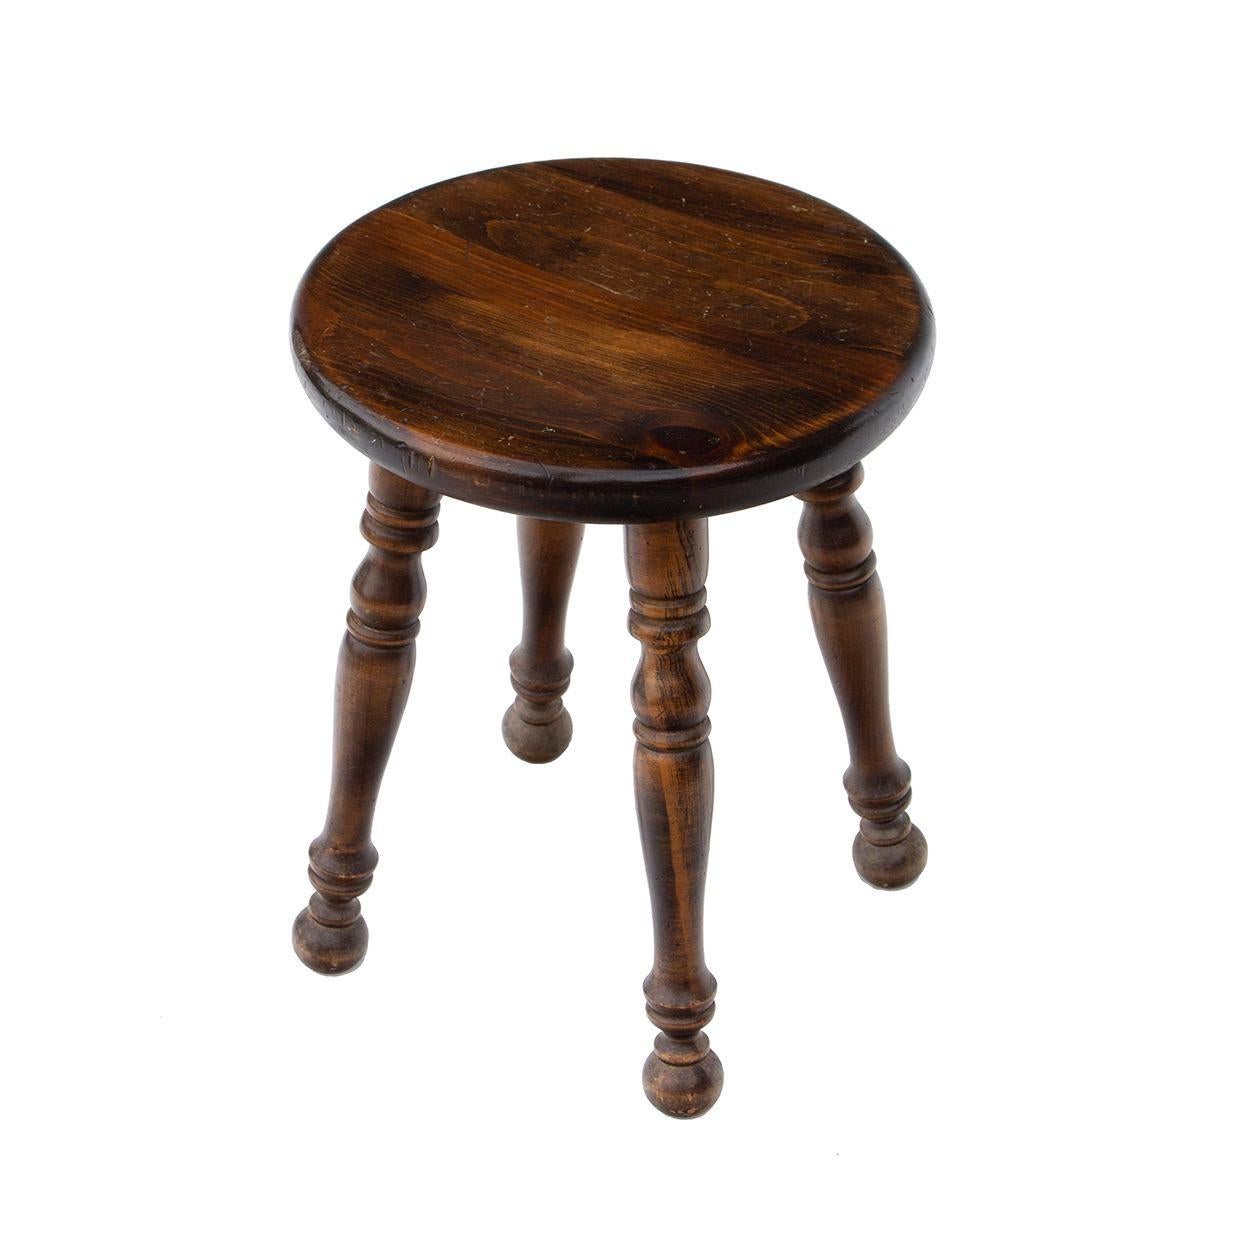 Rustic Dark Wooden Stool with Turned Legs For Sale